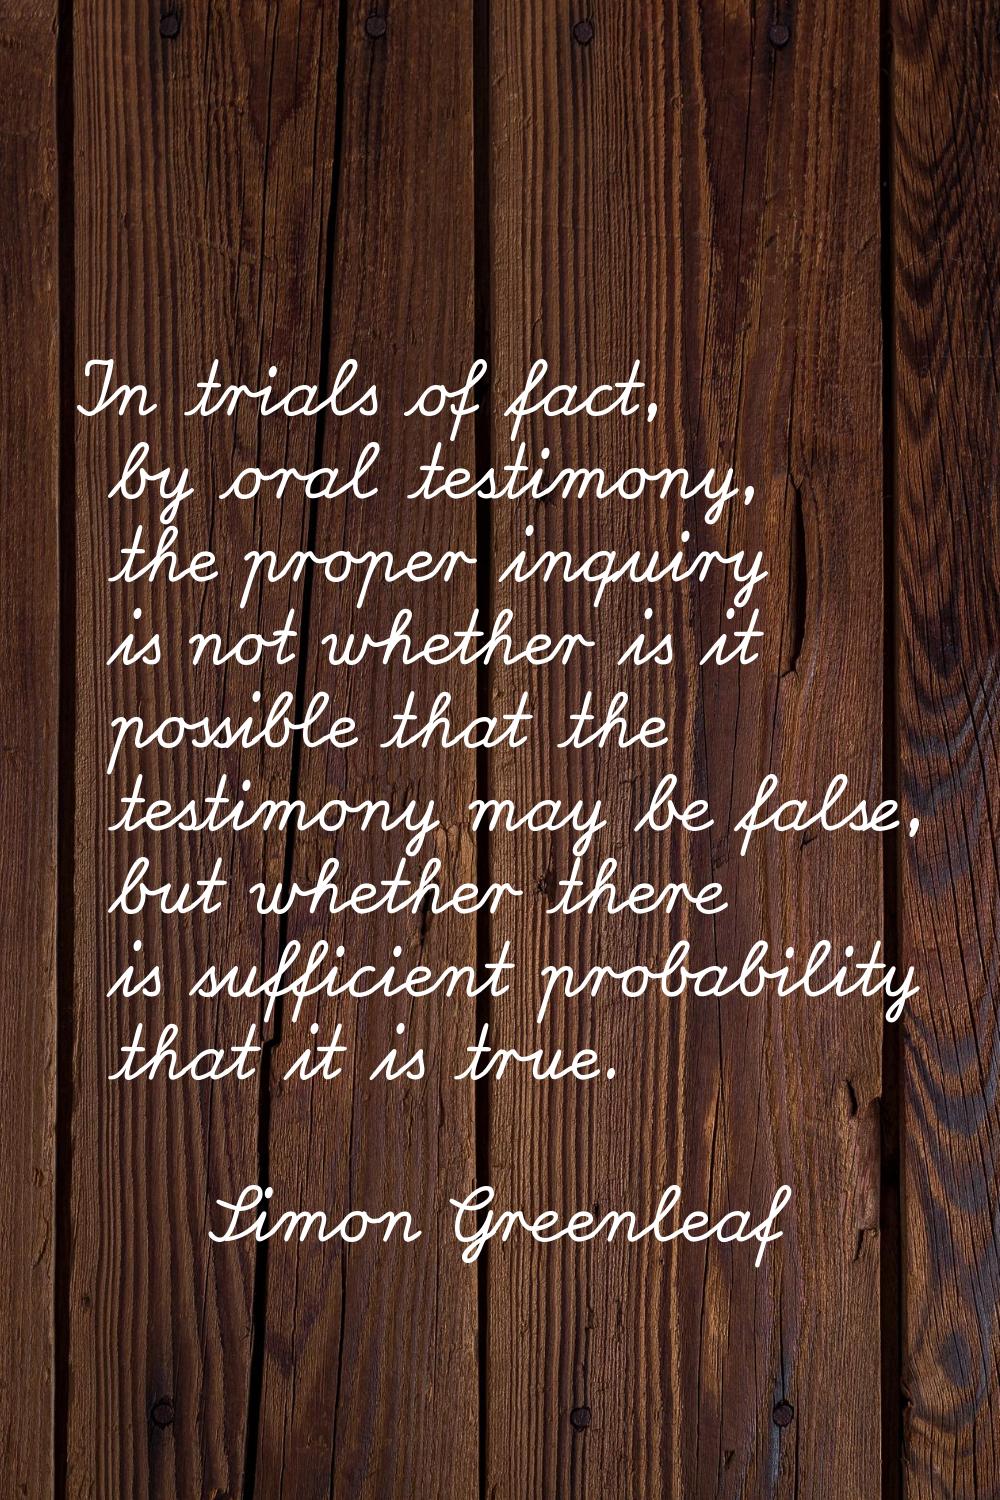 In trials of fact, by oral testimony, the proper inquiry is not whether is it possible that the tes